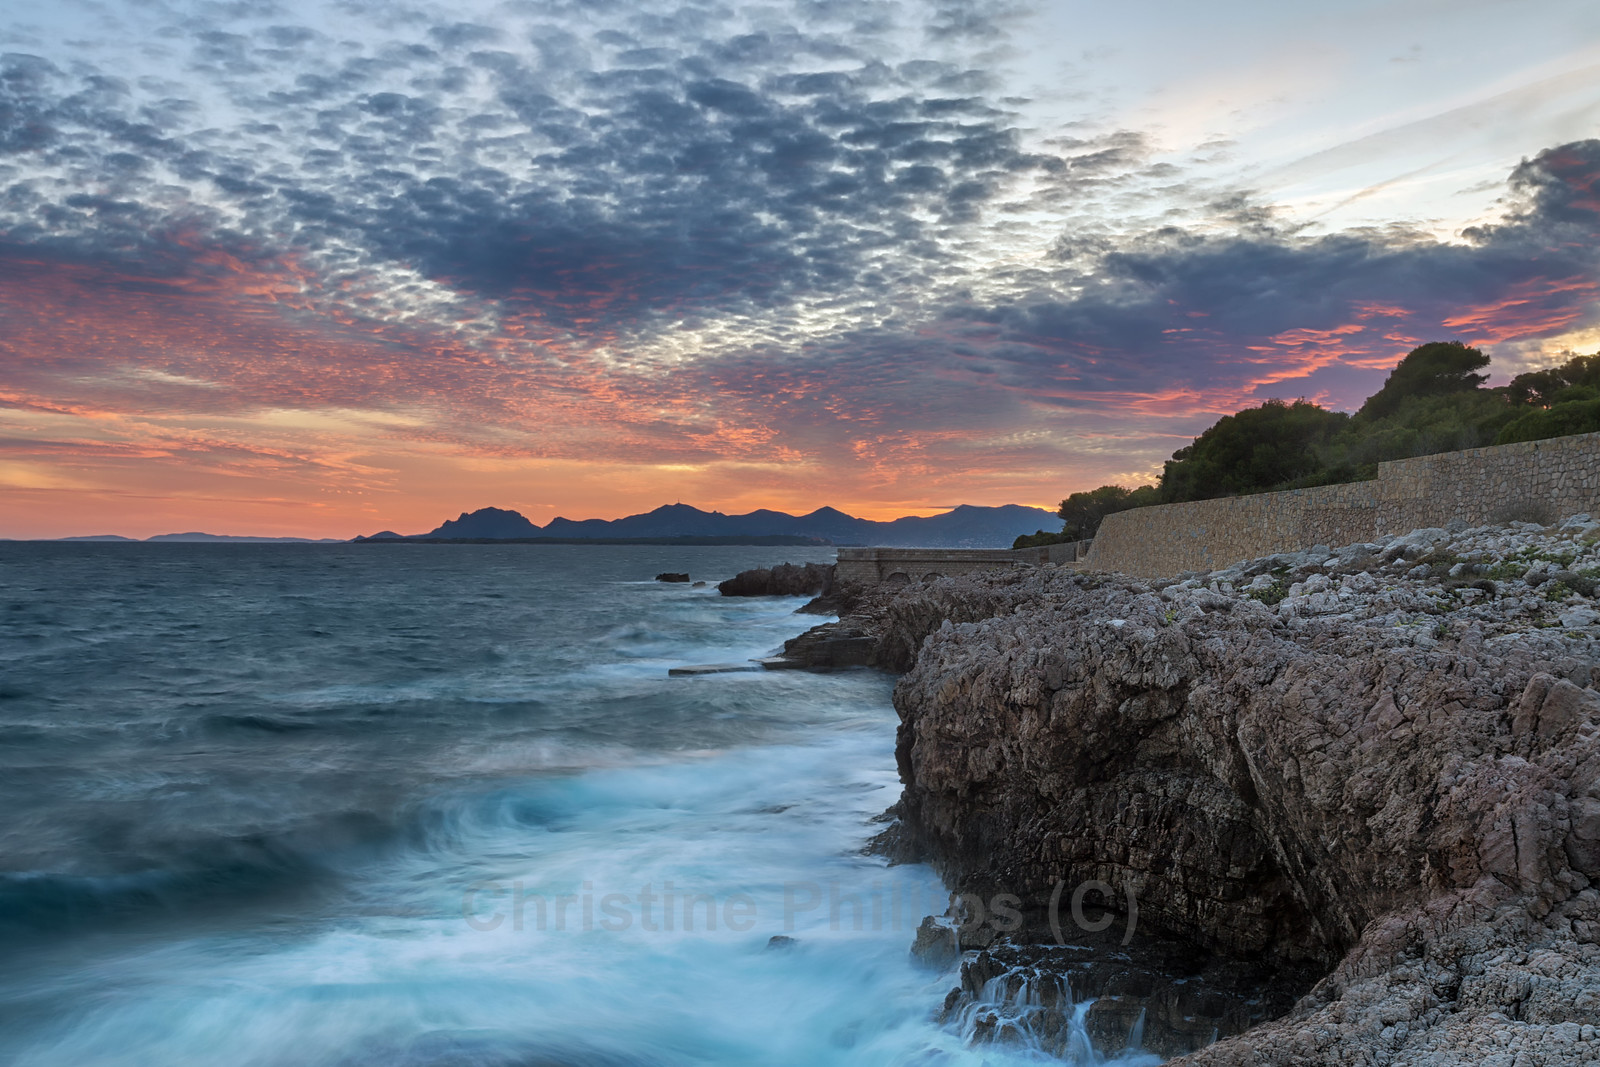 A walk along the coast in Antibes in France - Christine Phillips